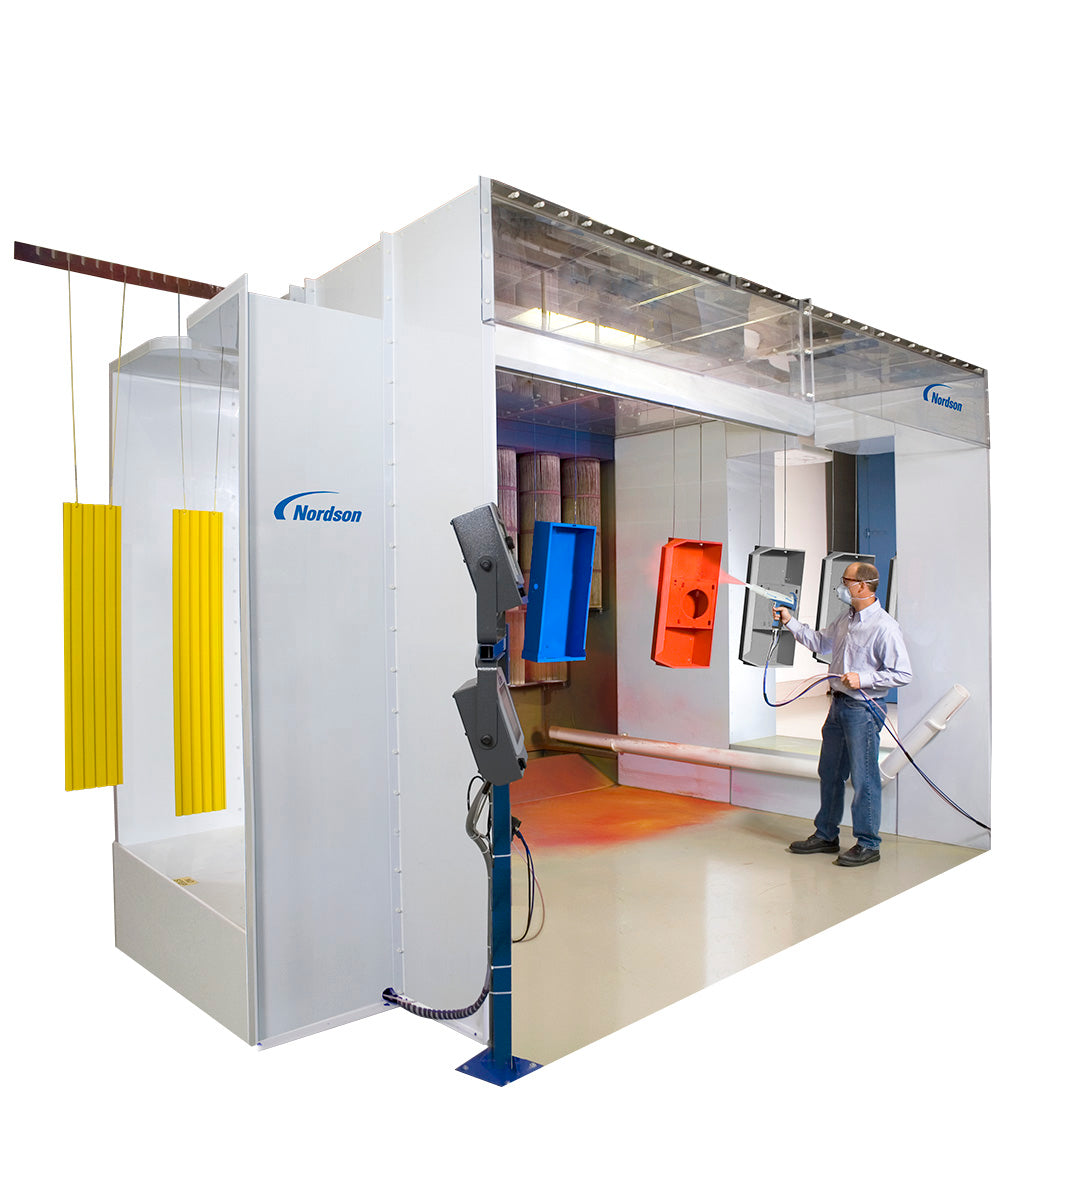 Revolutionizing Efficiency with Nordson's Lean Cell Powder Coating Booth